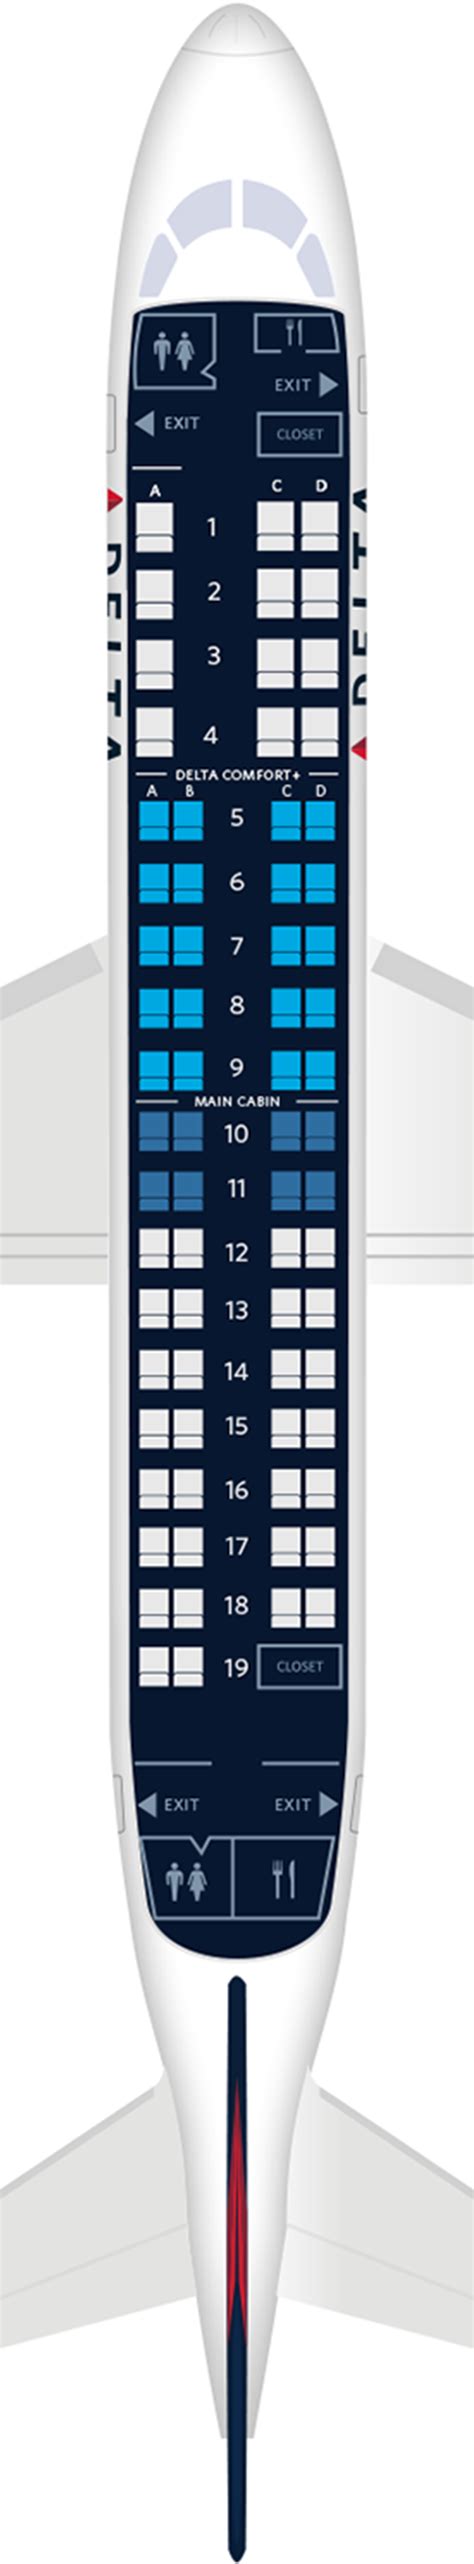 The Boeing 737 can be outfitted with up to 215 seats, according to 